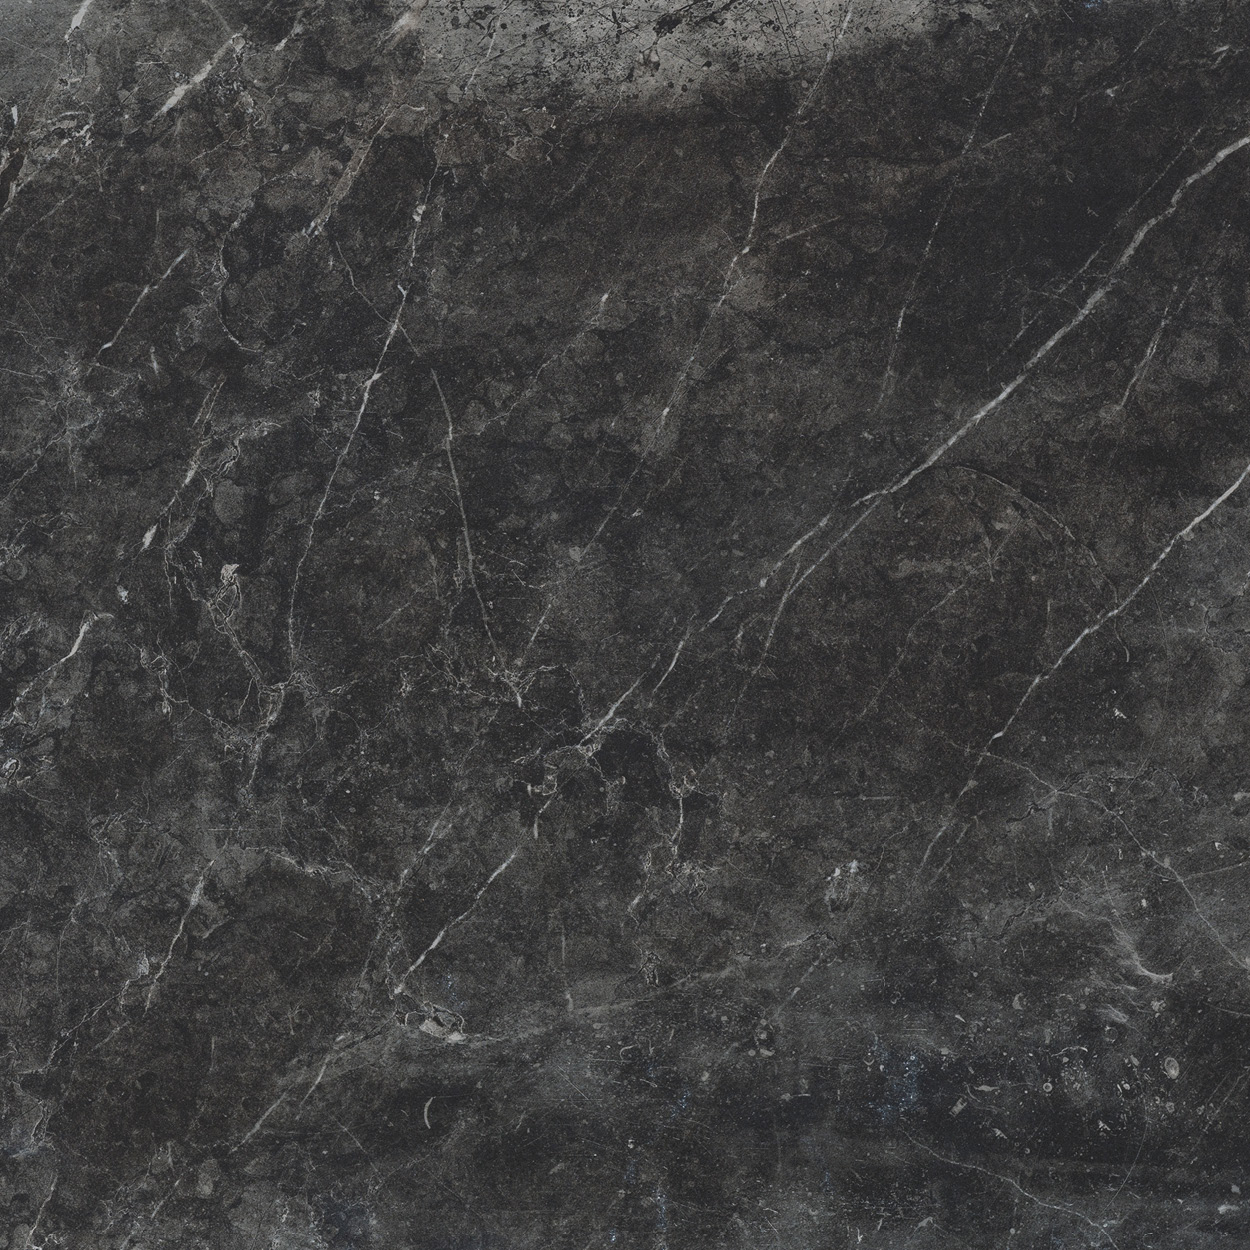 24 x 48 Evo Stone Graphite finished Rectified Porcelain Tile (SPECIAL ORDER ONLY)